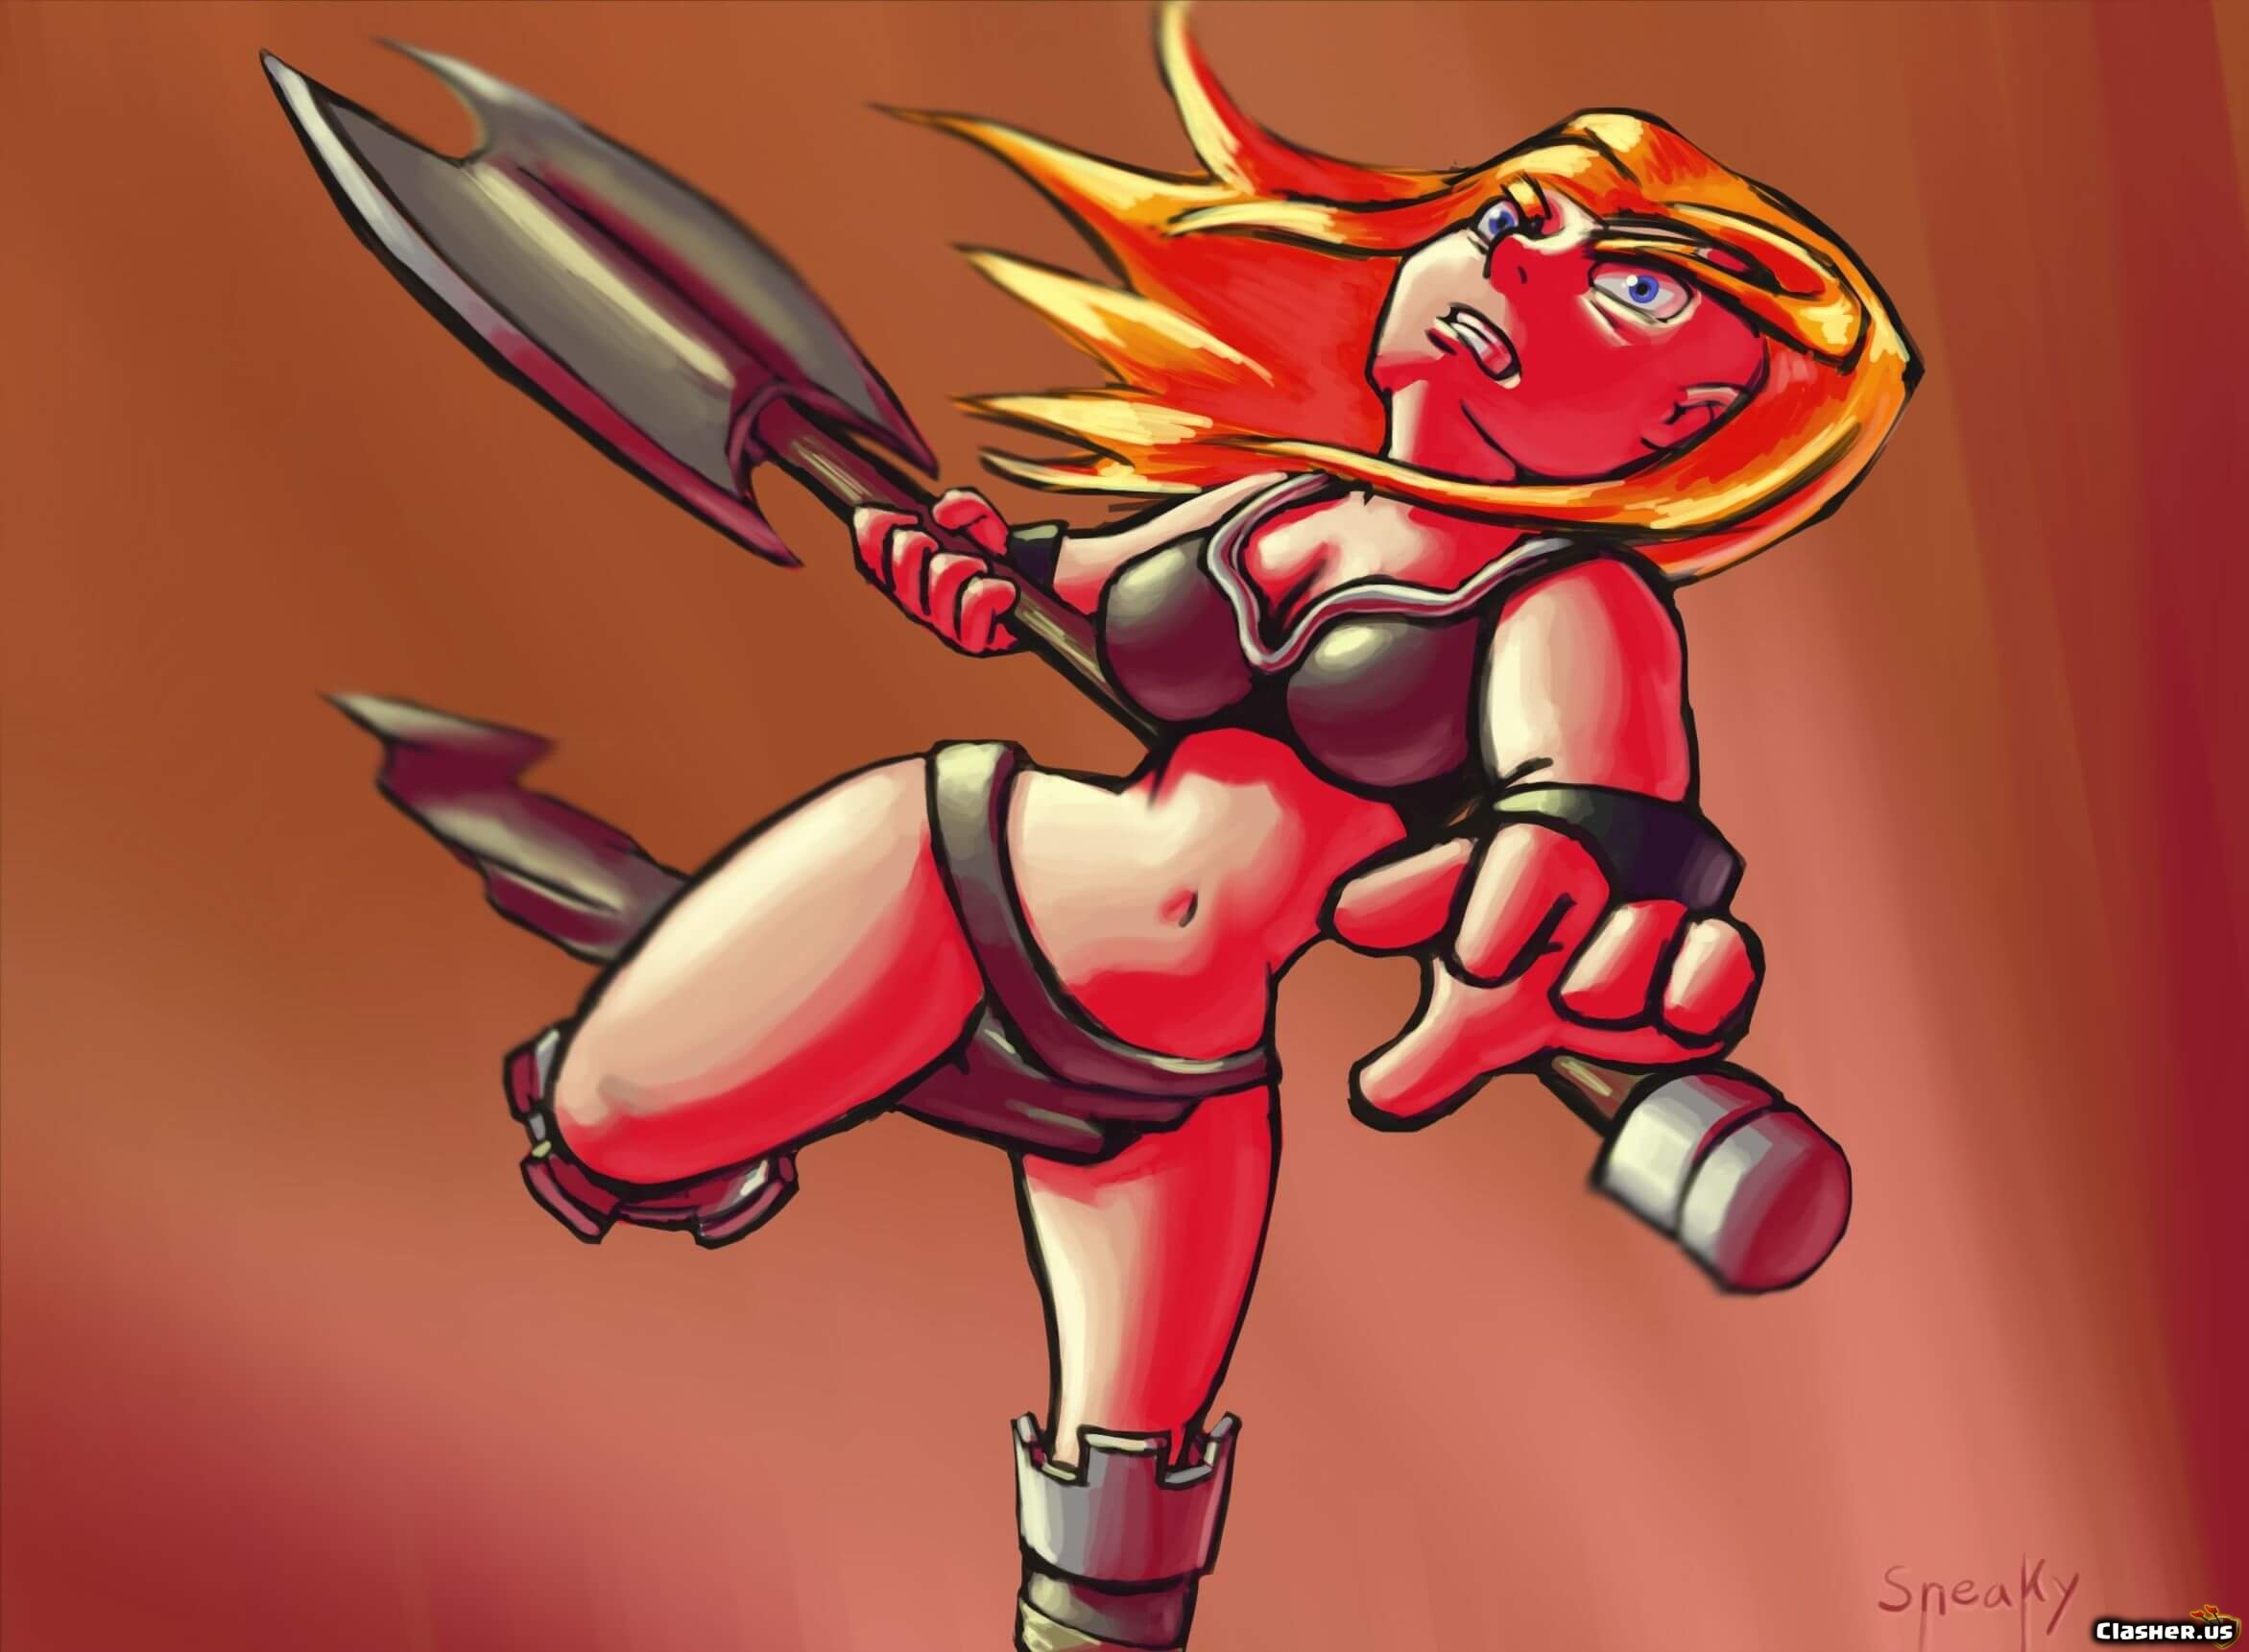 Valkyrie art drawing nice - Clash of Clans Wallpapers.